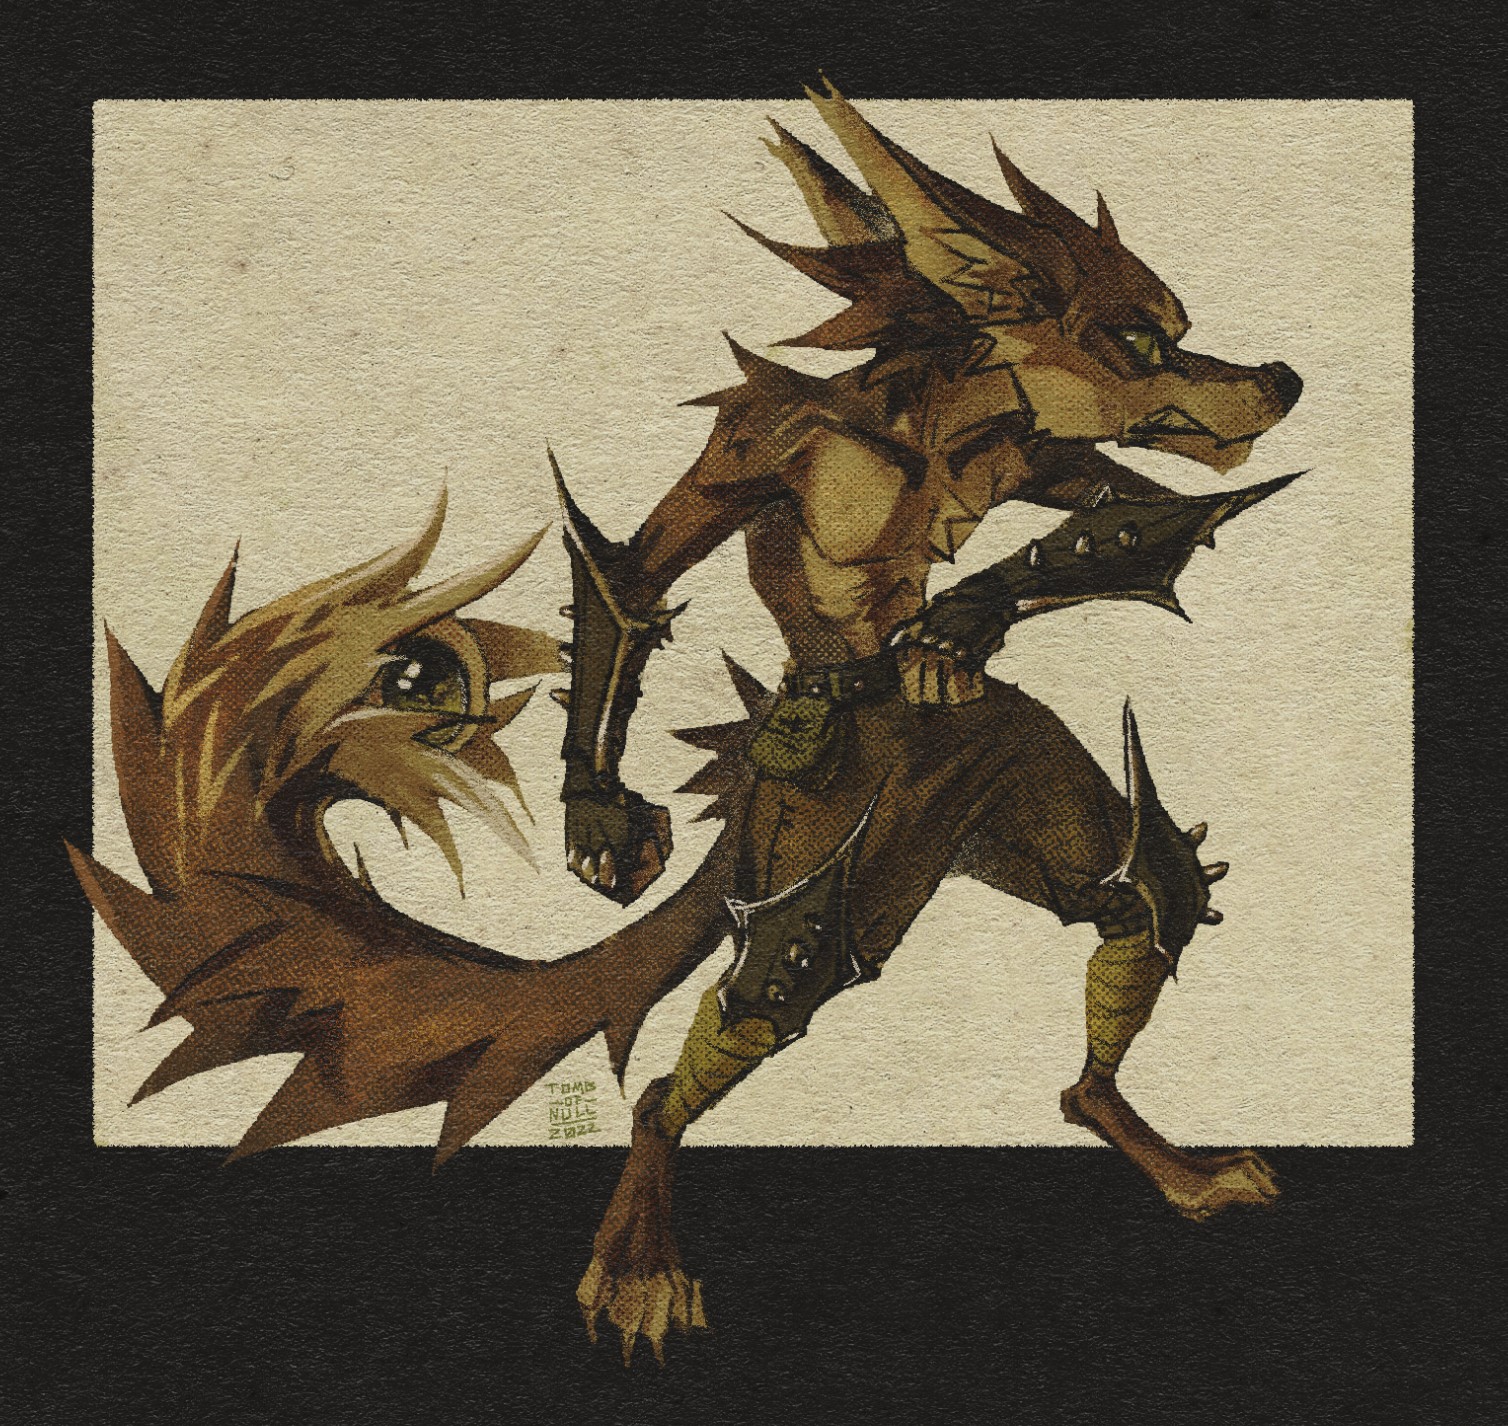 An anthro fox-like character. They have a snarl on their face. They are also wearing baggy pants, armor, and an eye is peering through the tip of their tail.